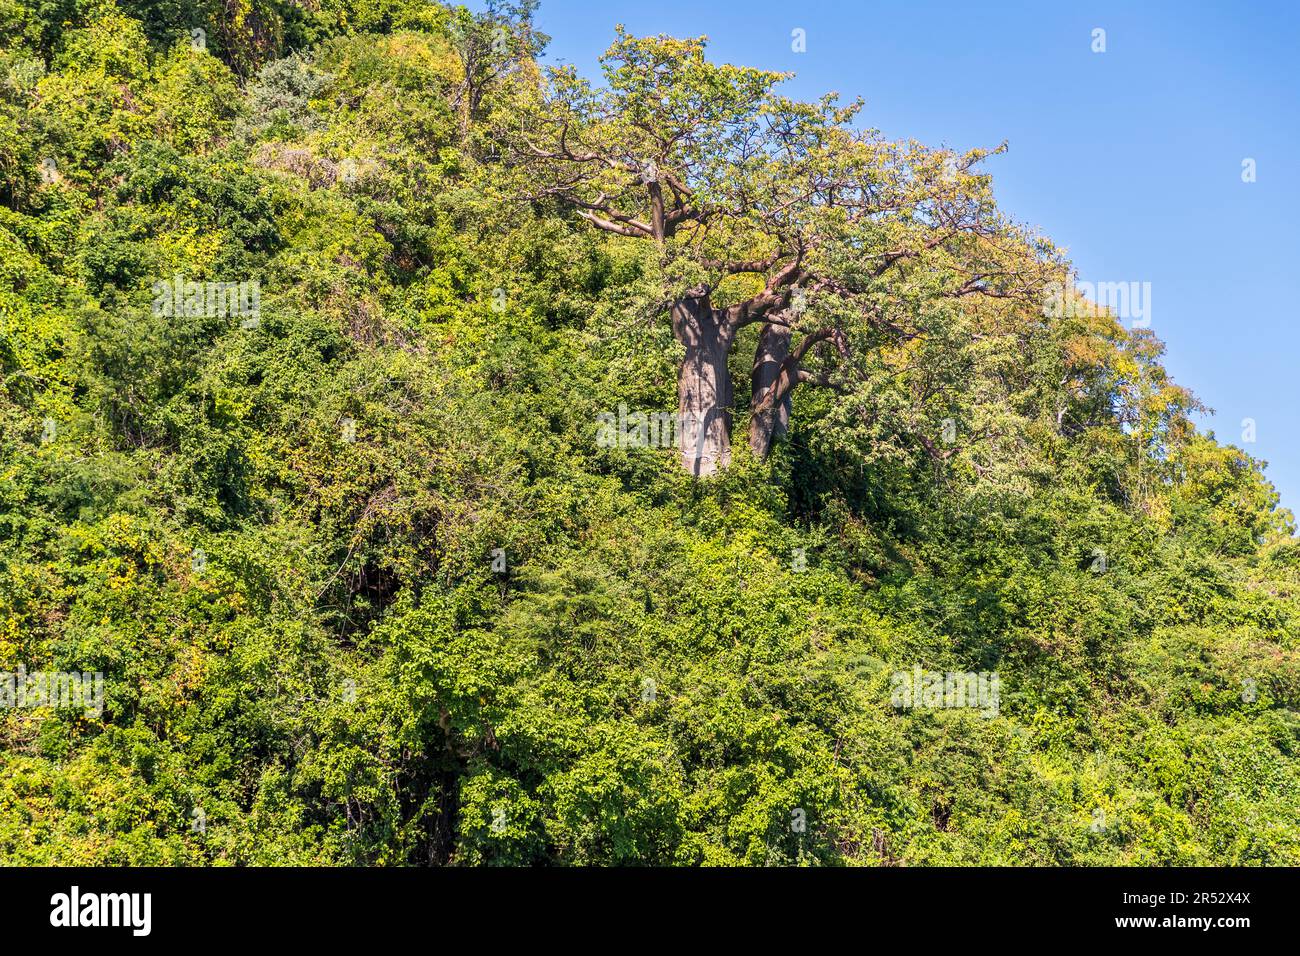 In the untouched forest on the shore of Lake Malawi also grow the mighty Baobab trees. Baobab trees in the jungle on the steep shore of Lake Malawi. Baobab Tree's can store a lot of water Kasankha, Malawi Stock Photo